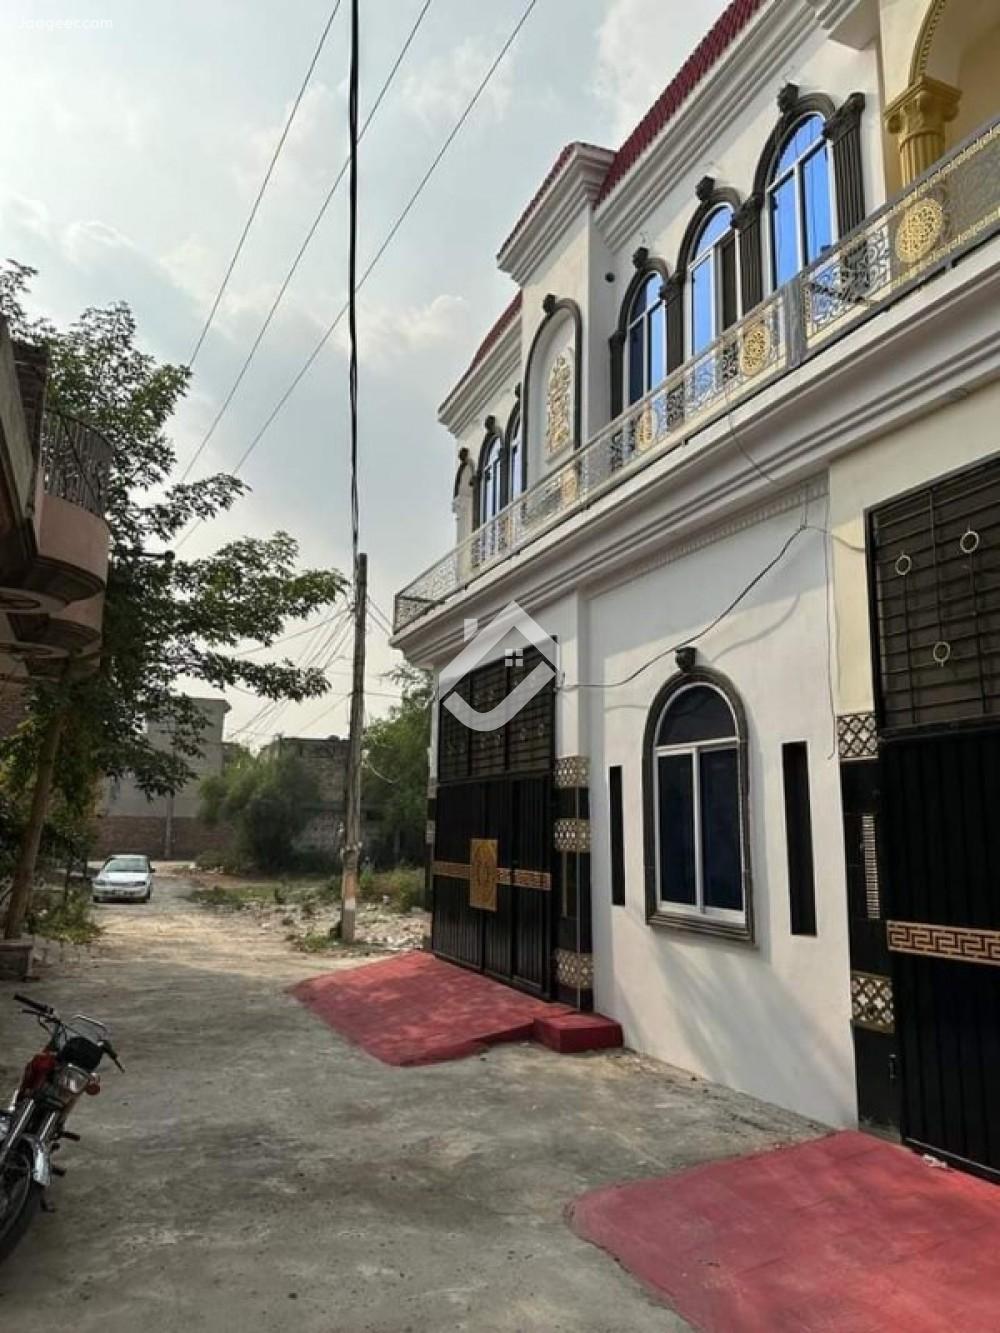 View  7 Marla Double Storey Corner House For Sale In Lahore Road  Al Noor Park  in Lahore Road , Sheikhupura